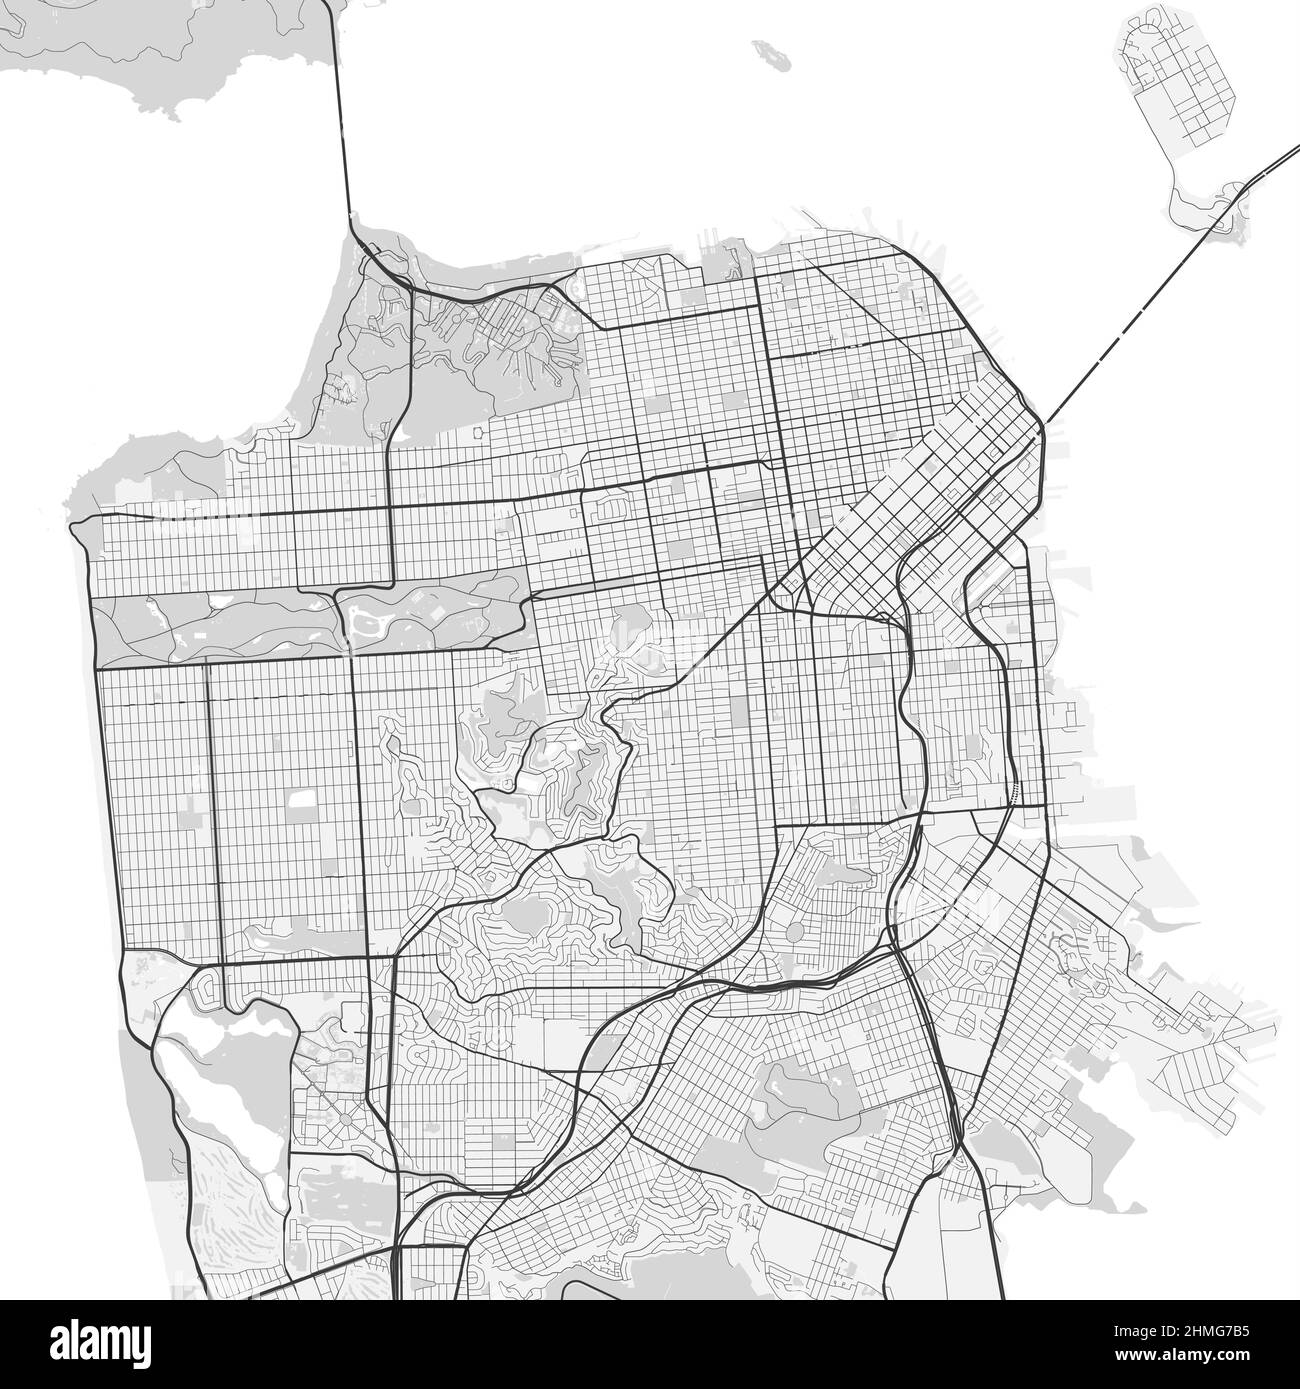 Vector map of San Francisco city. Urban grayscale poster. Road map image with metropolitan city area view. Stock Vector